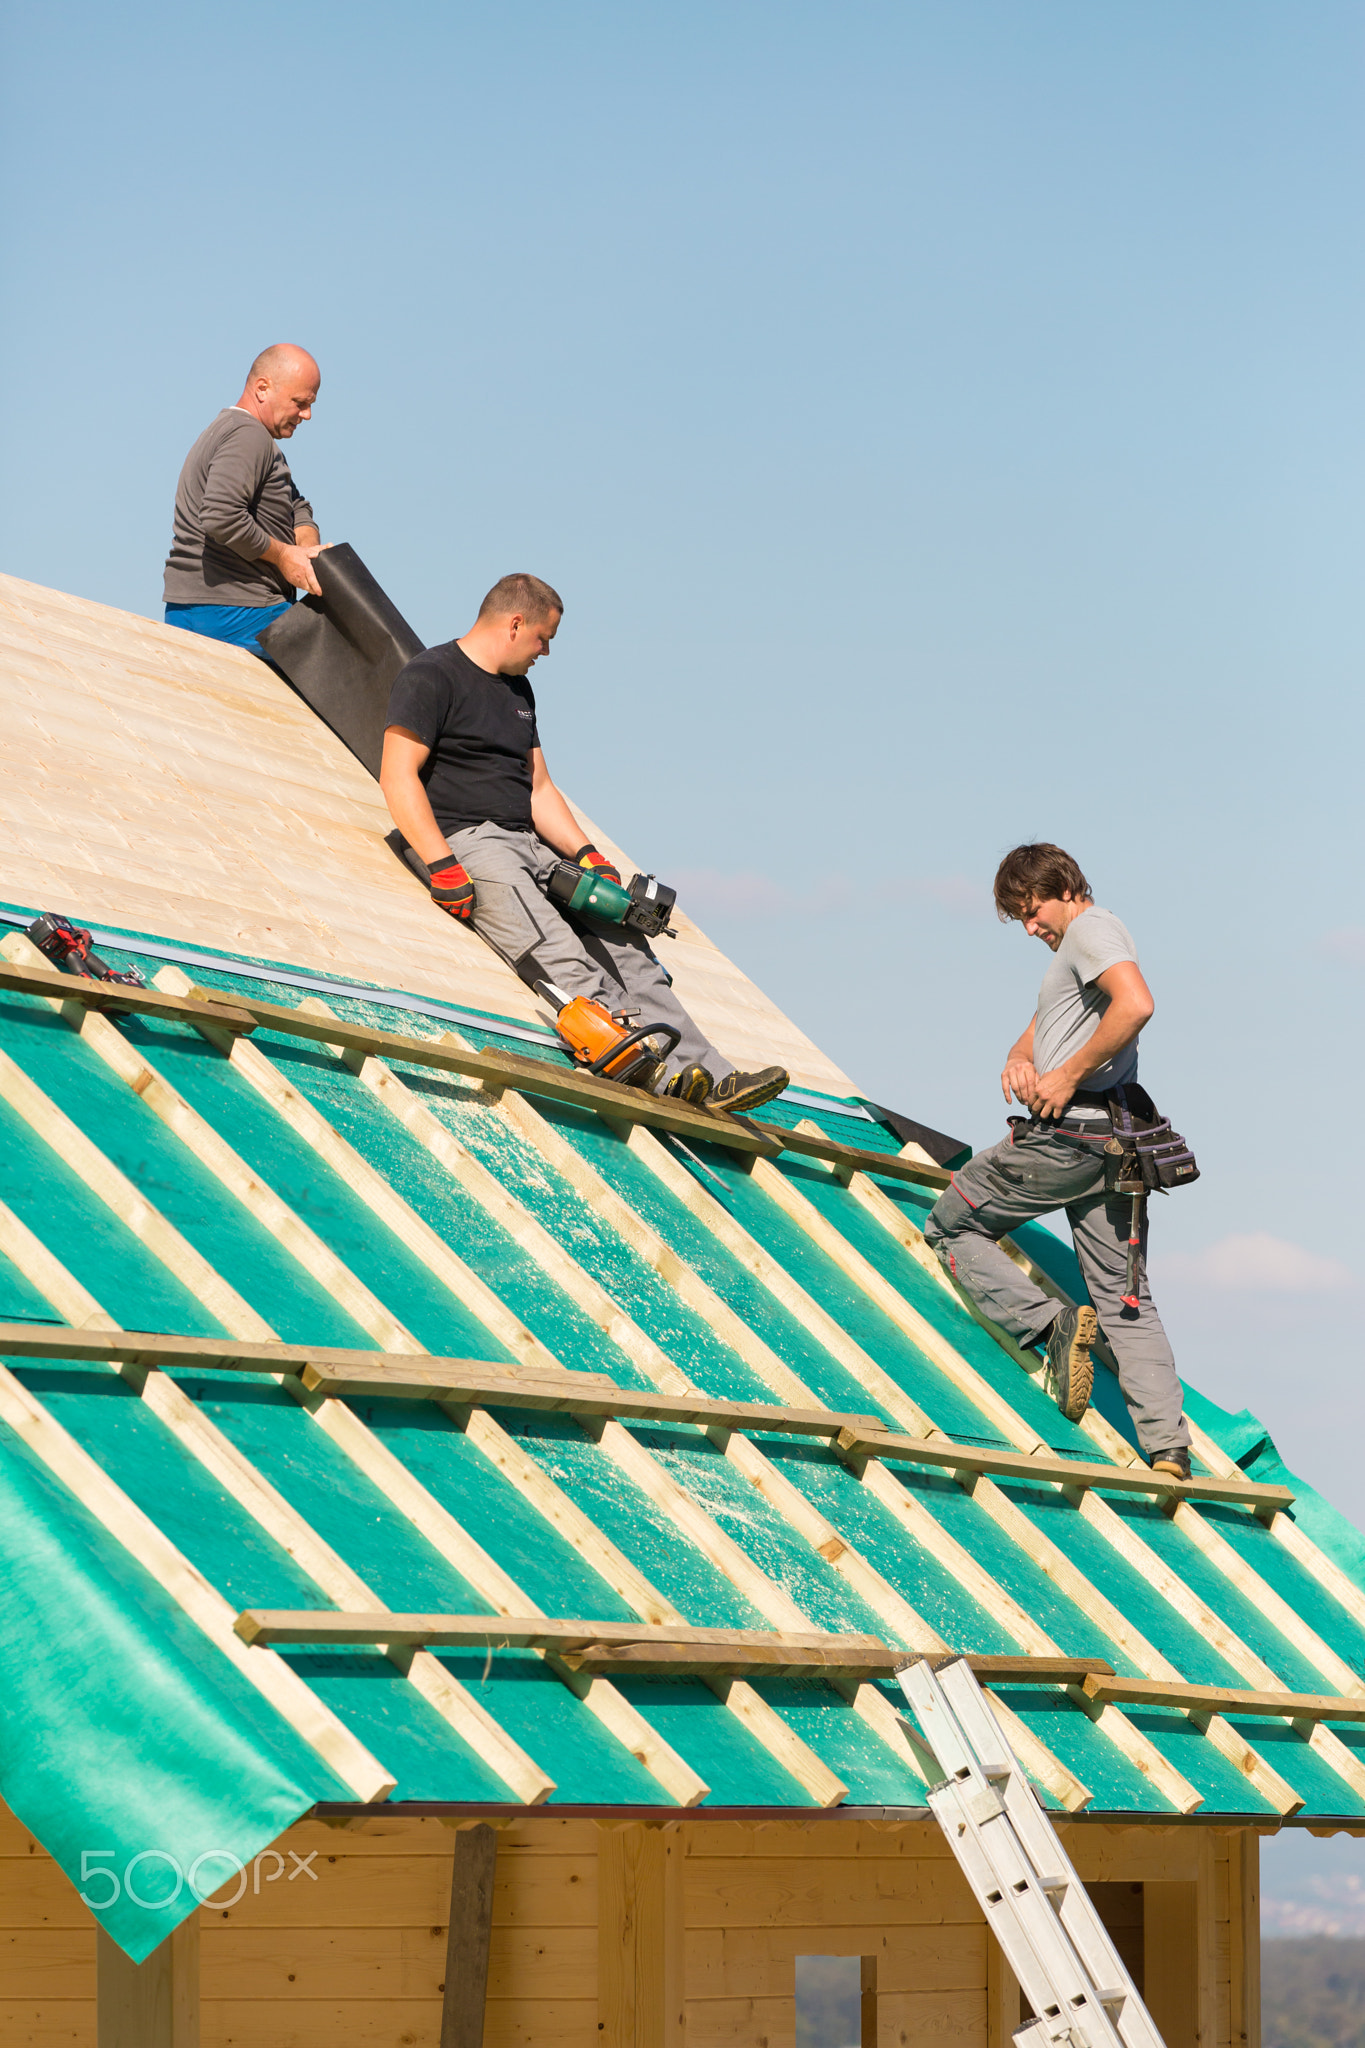 Builders at work with wooden roof construction.